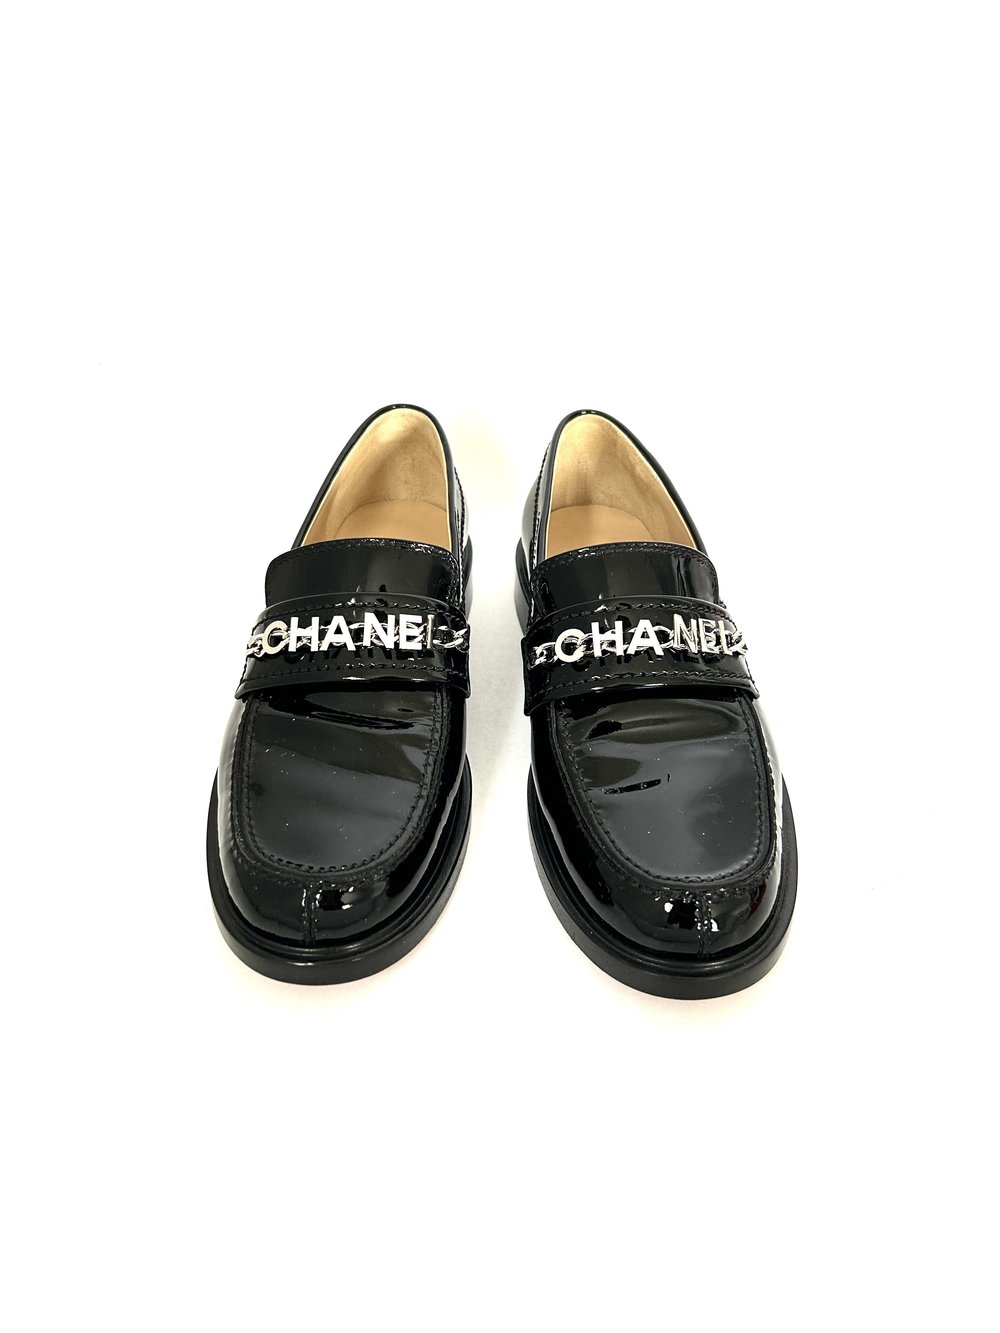 Chanel Size 38 CC Logo Flats Chain Loafers Patent Black